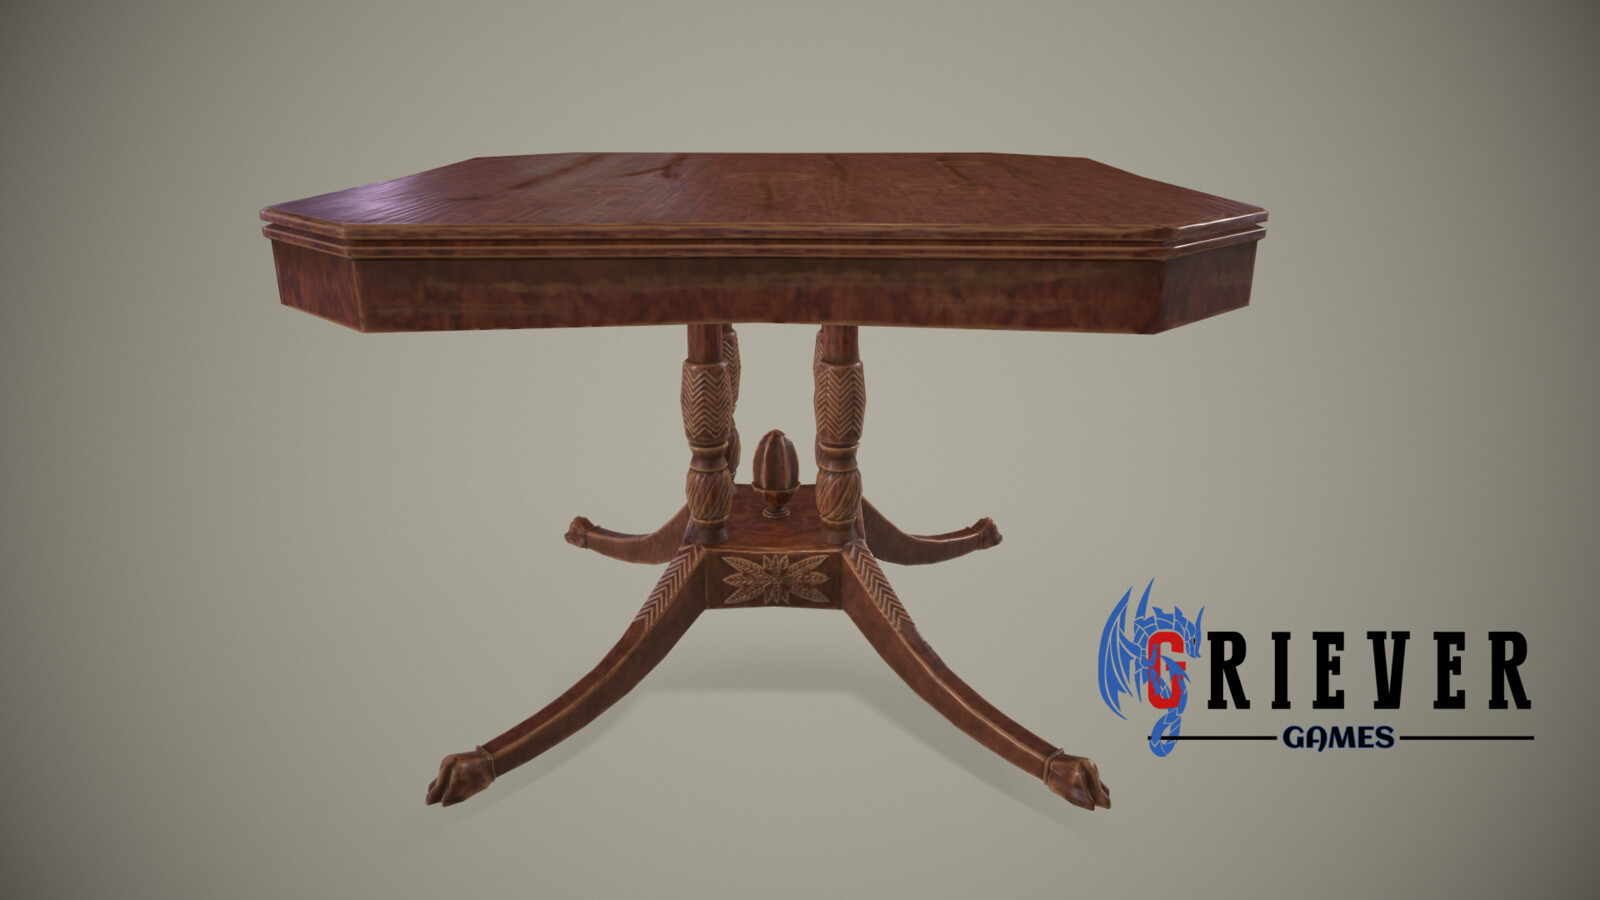 A well used ornate wooden table.